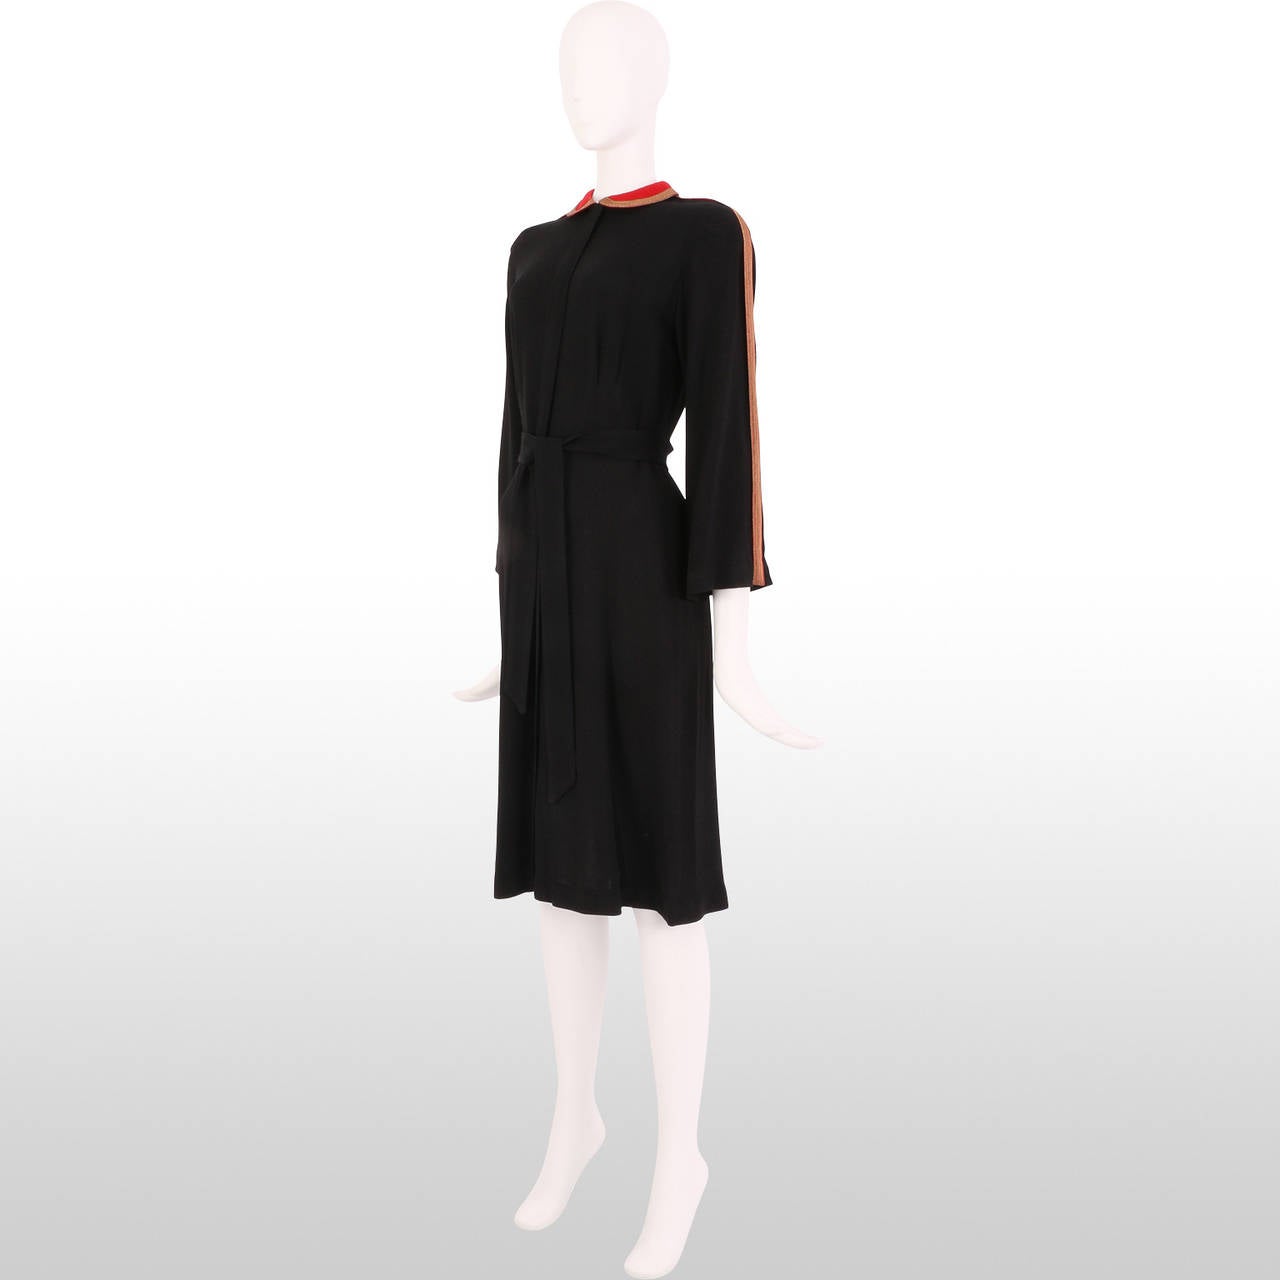 This gorgeous 1930's dress is a made from elegant black crepe fabric that drapes beautifully. This simple dress is given bold detail with the pillar box red peter pan collar and the gold and red metallic trim that lines collar and the sleeves. These